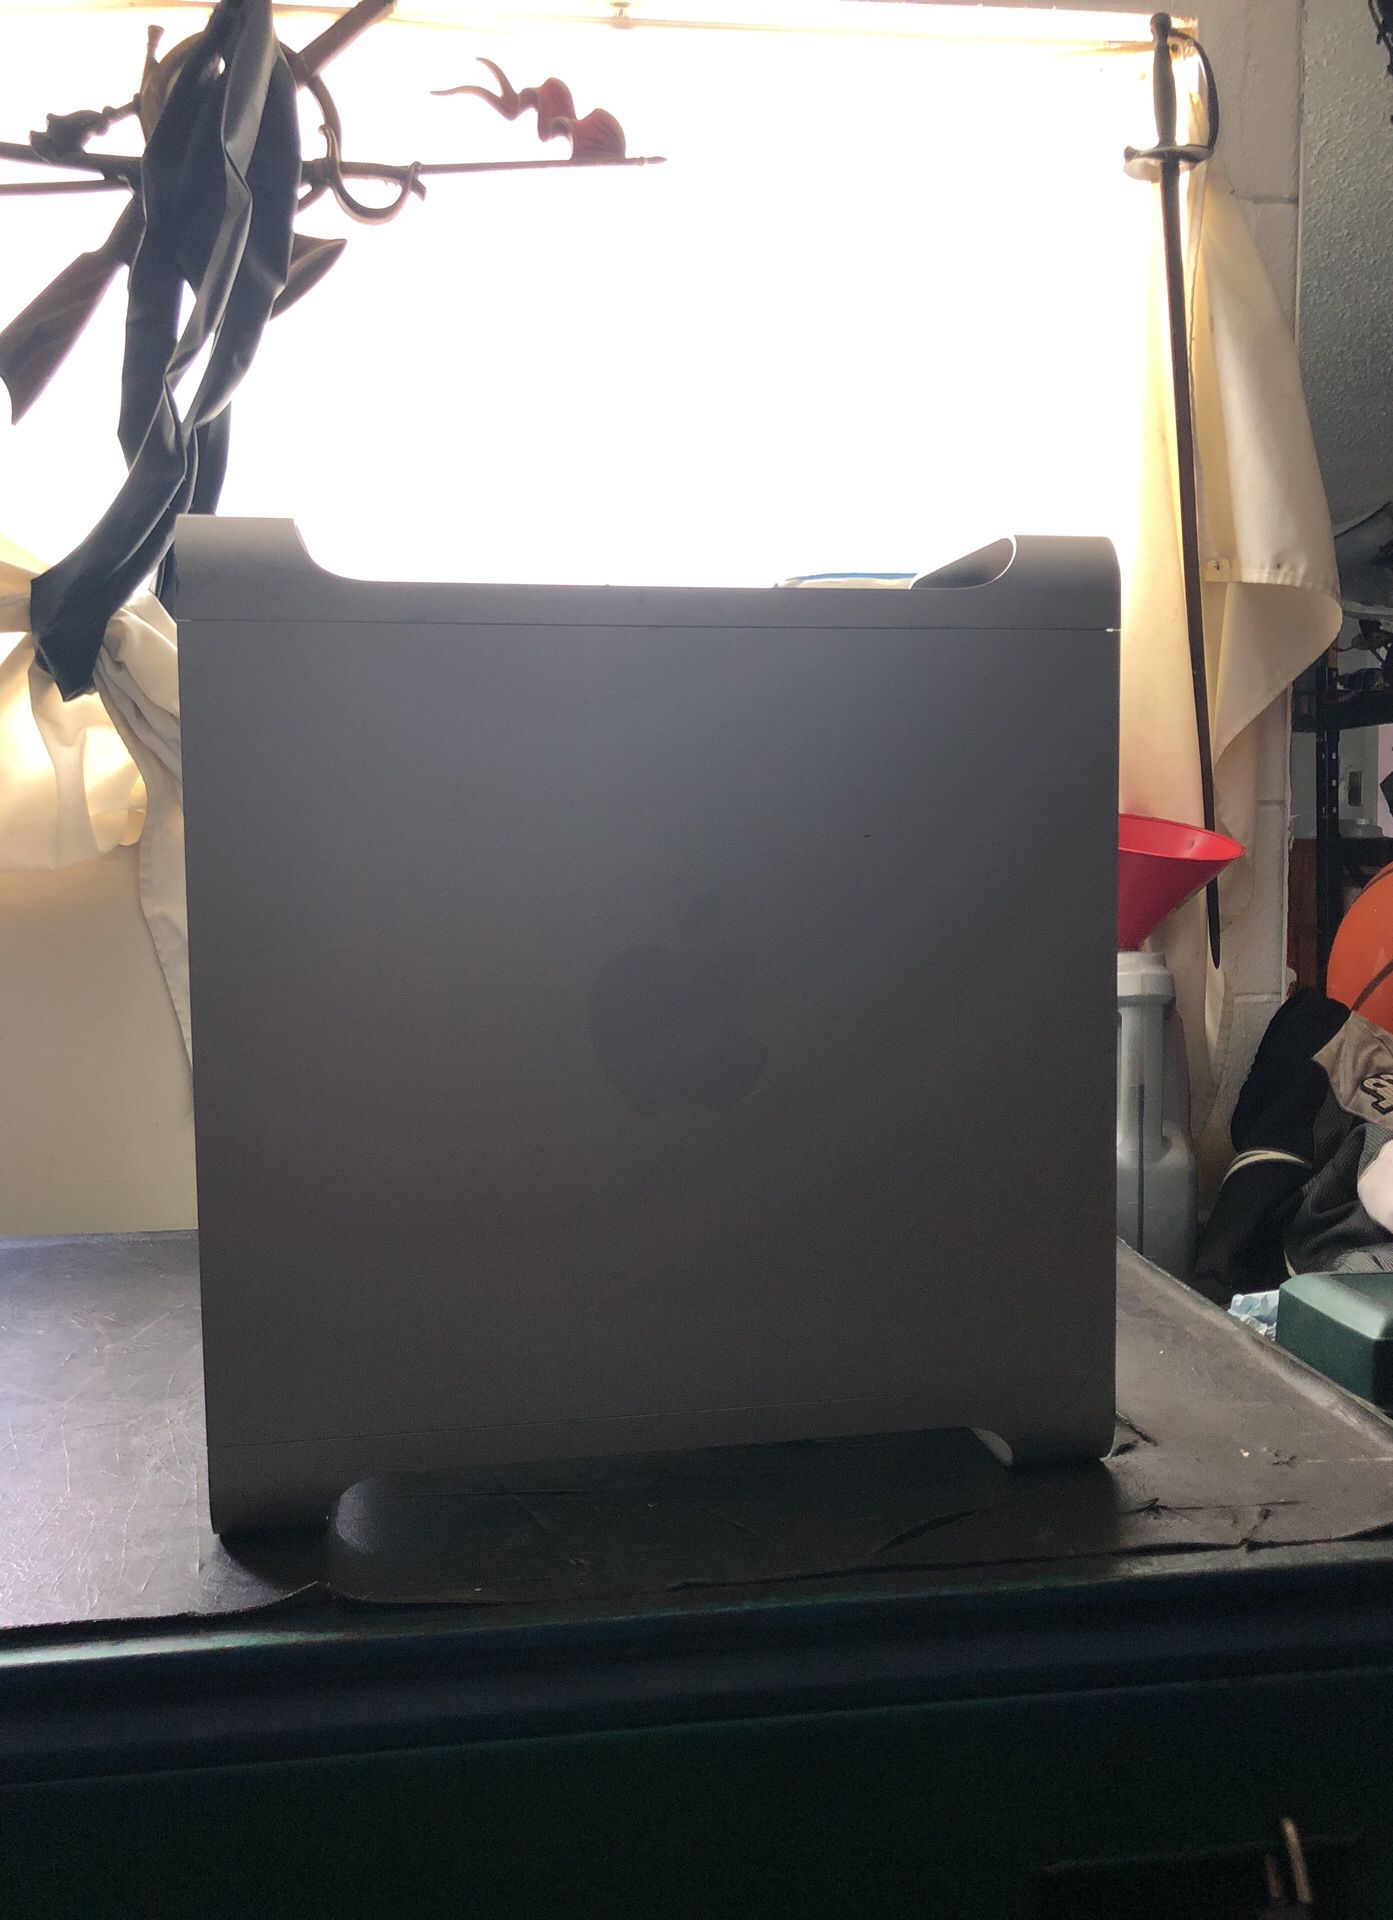 Apple computer tower